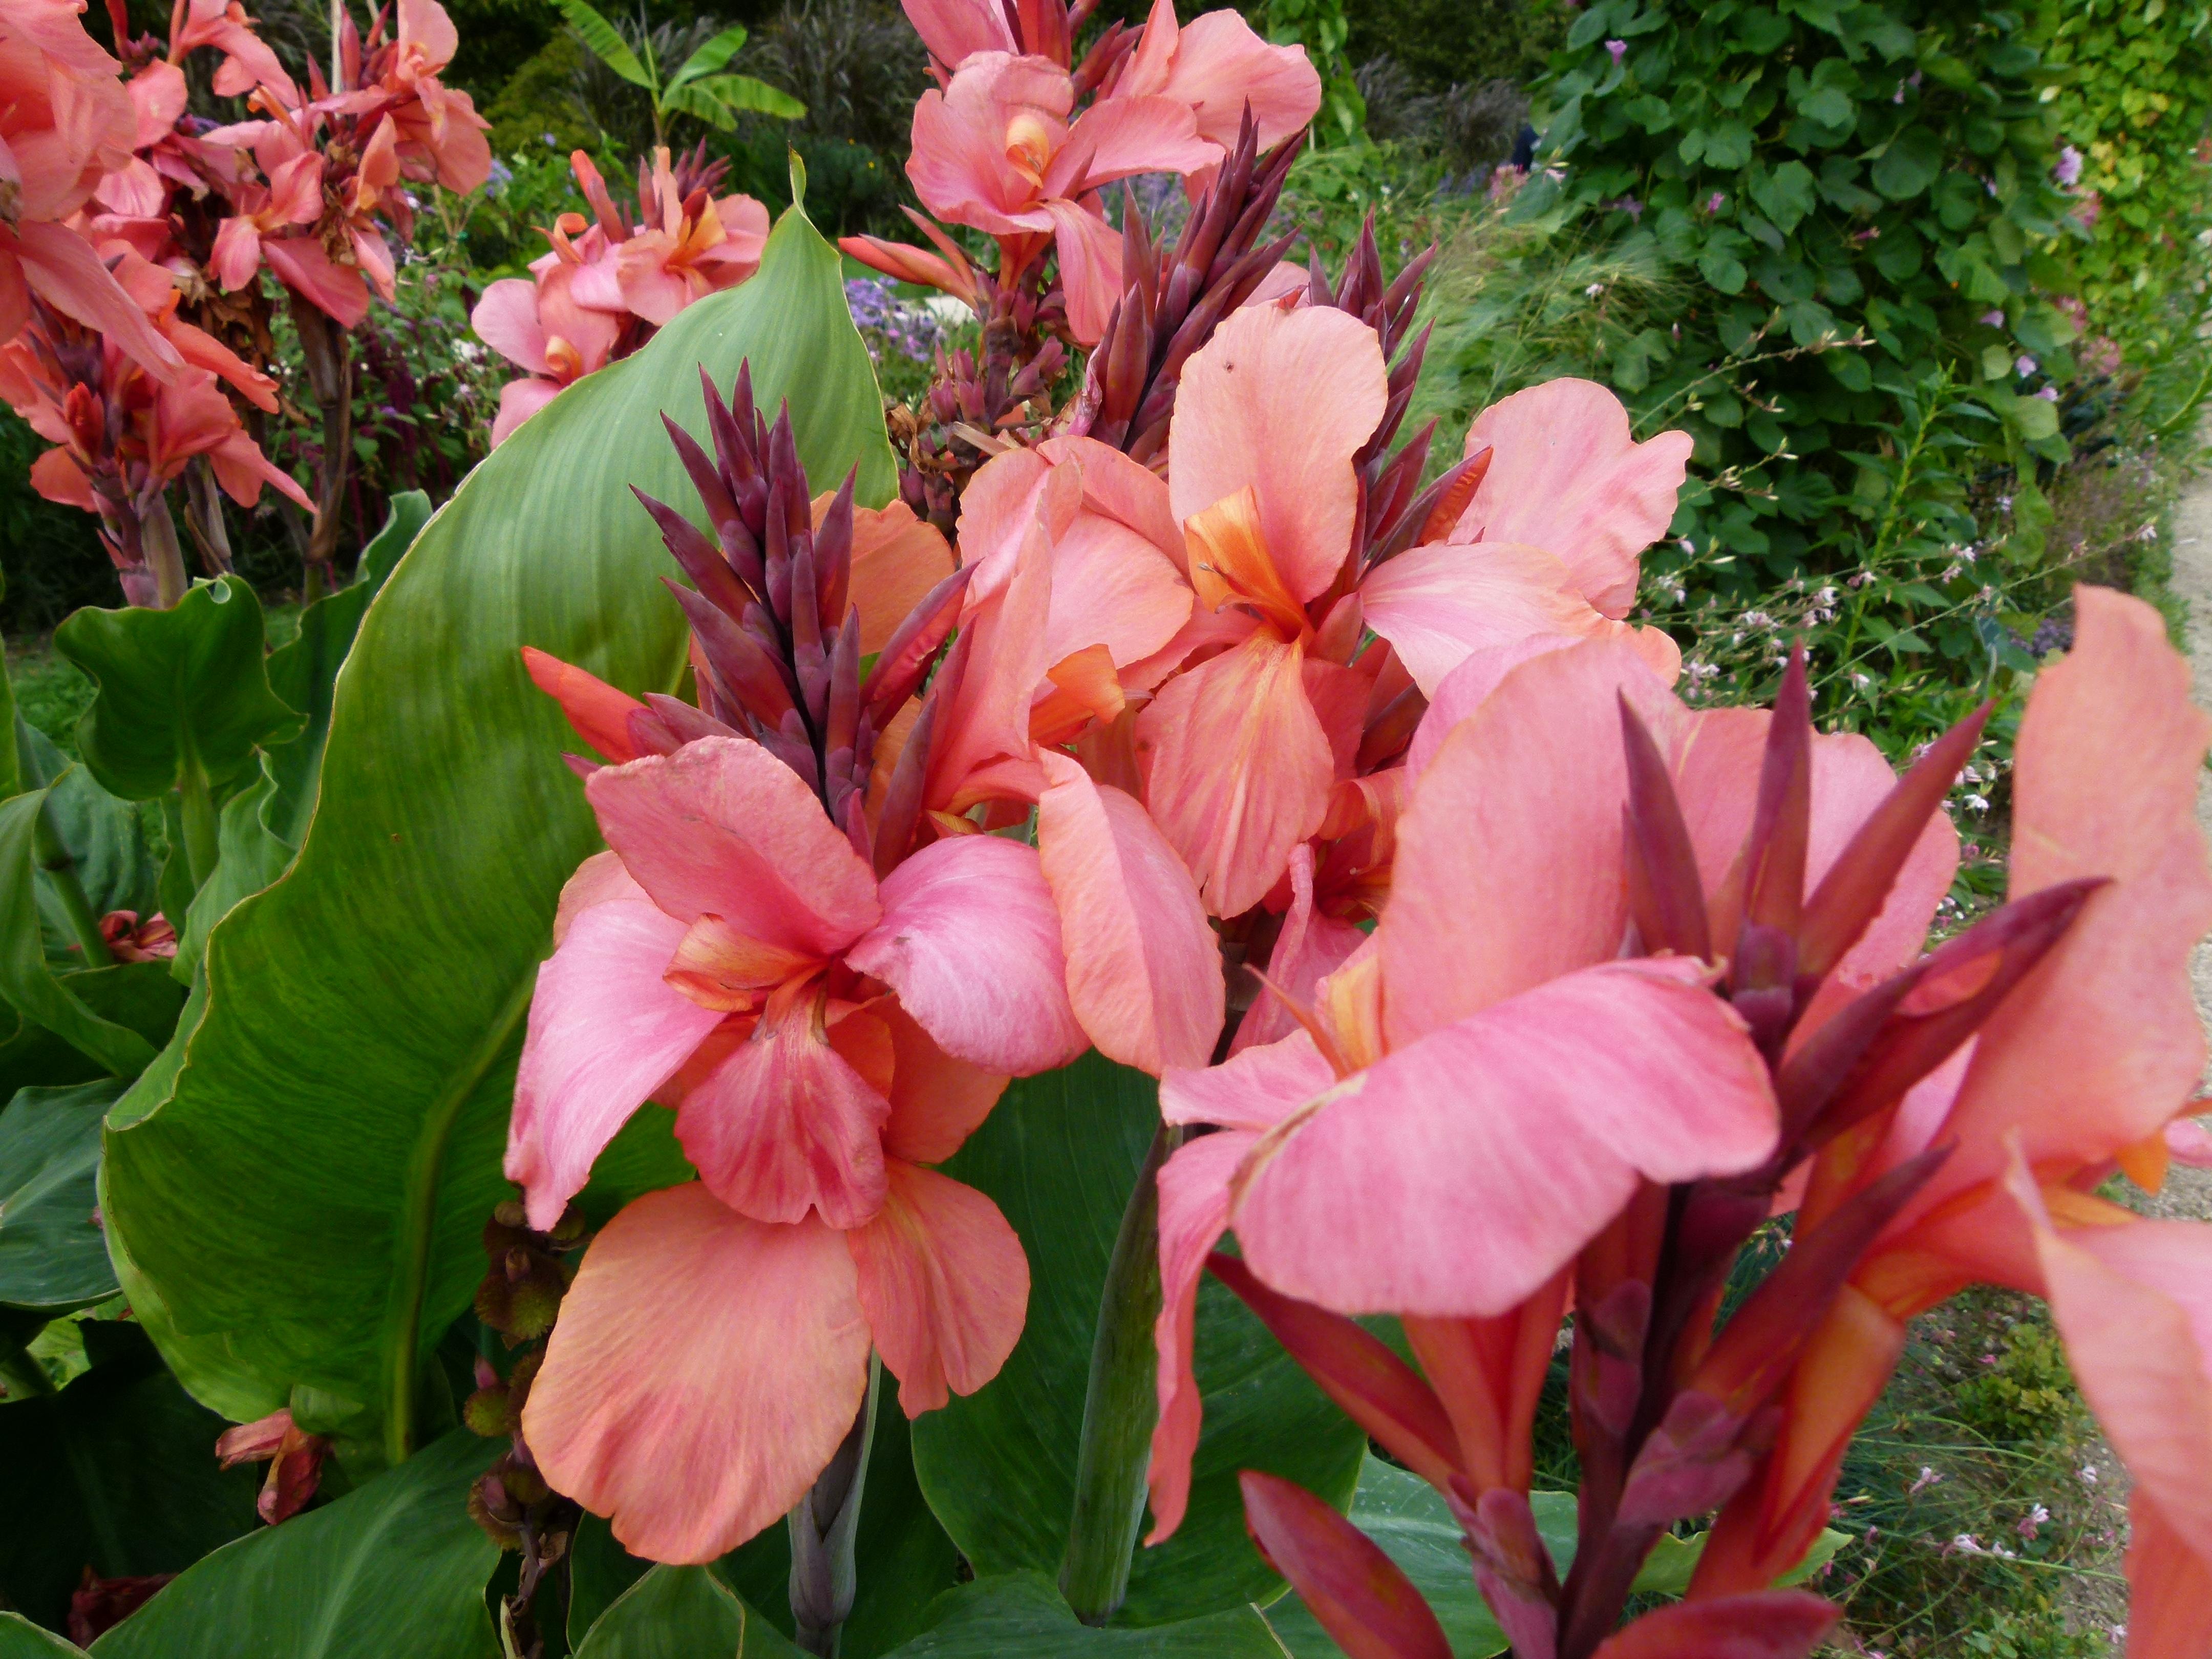 Canna 'Pink President' - Canna (Shipping begins March 2022) from Leo Berbee Bulb Company